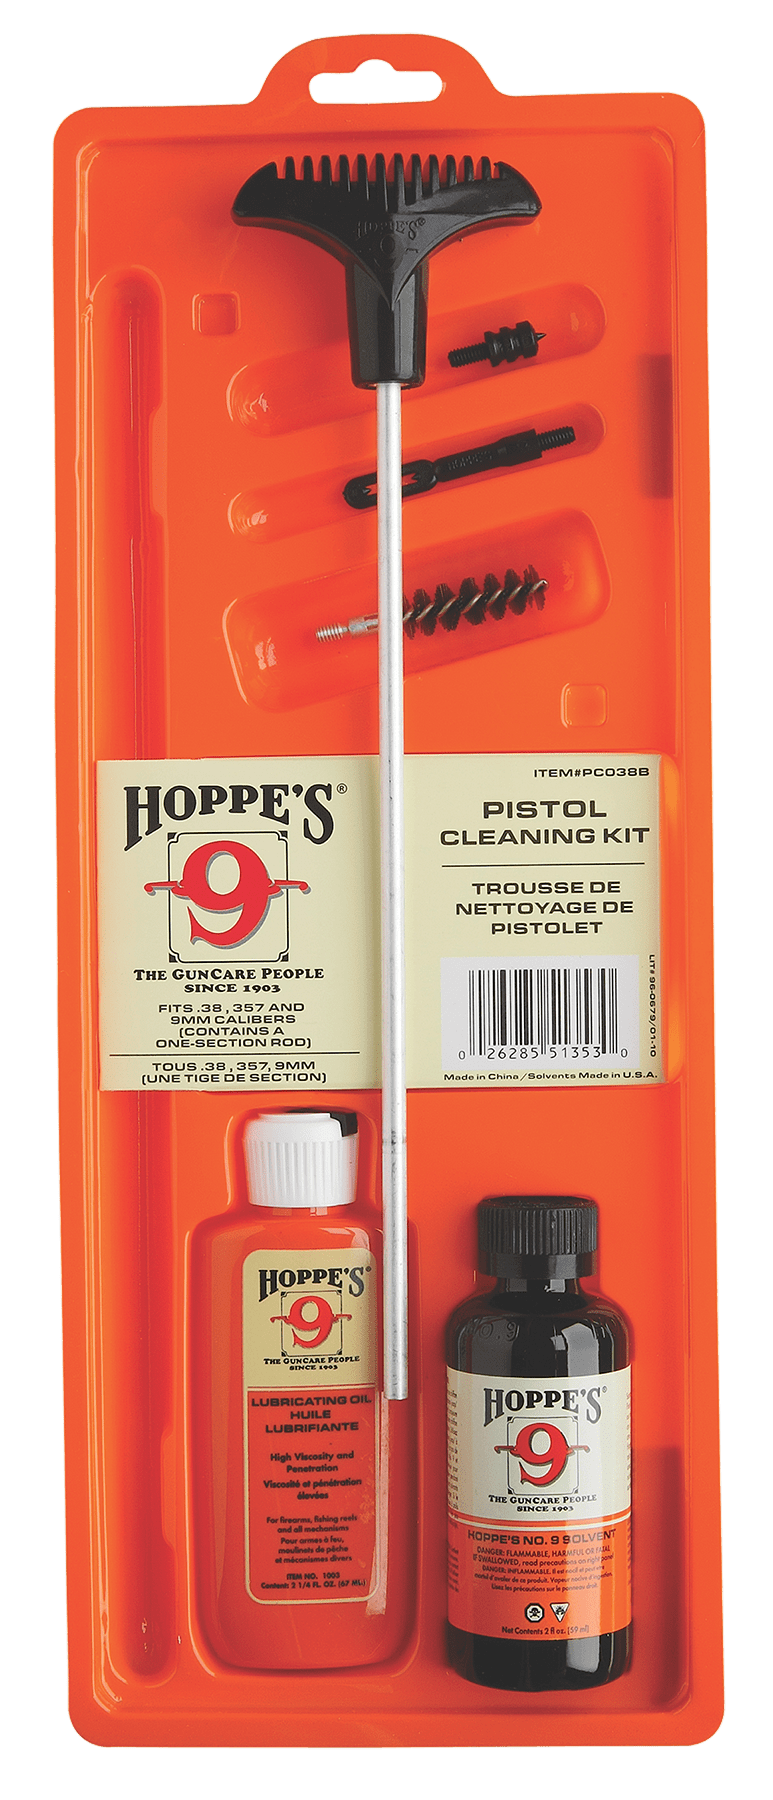 Hoppe's Hoppes 40/10mm Pstl Clng Kit Clam Cleaning Equipment